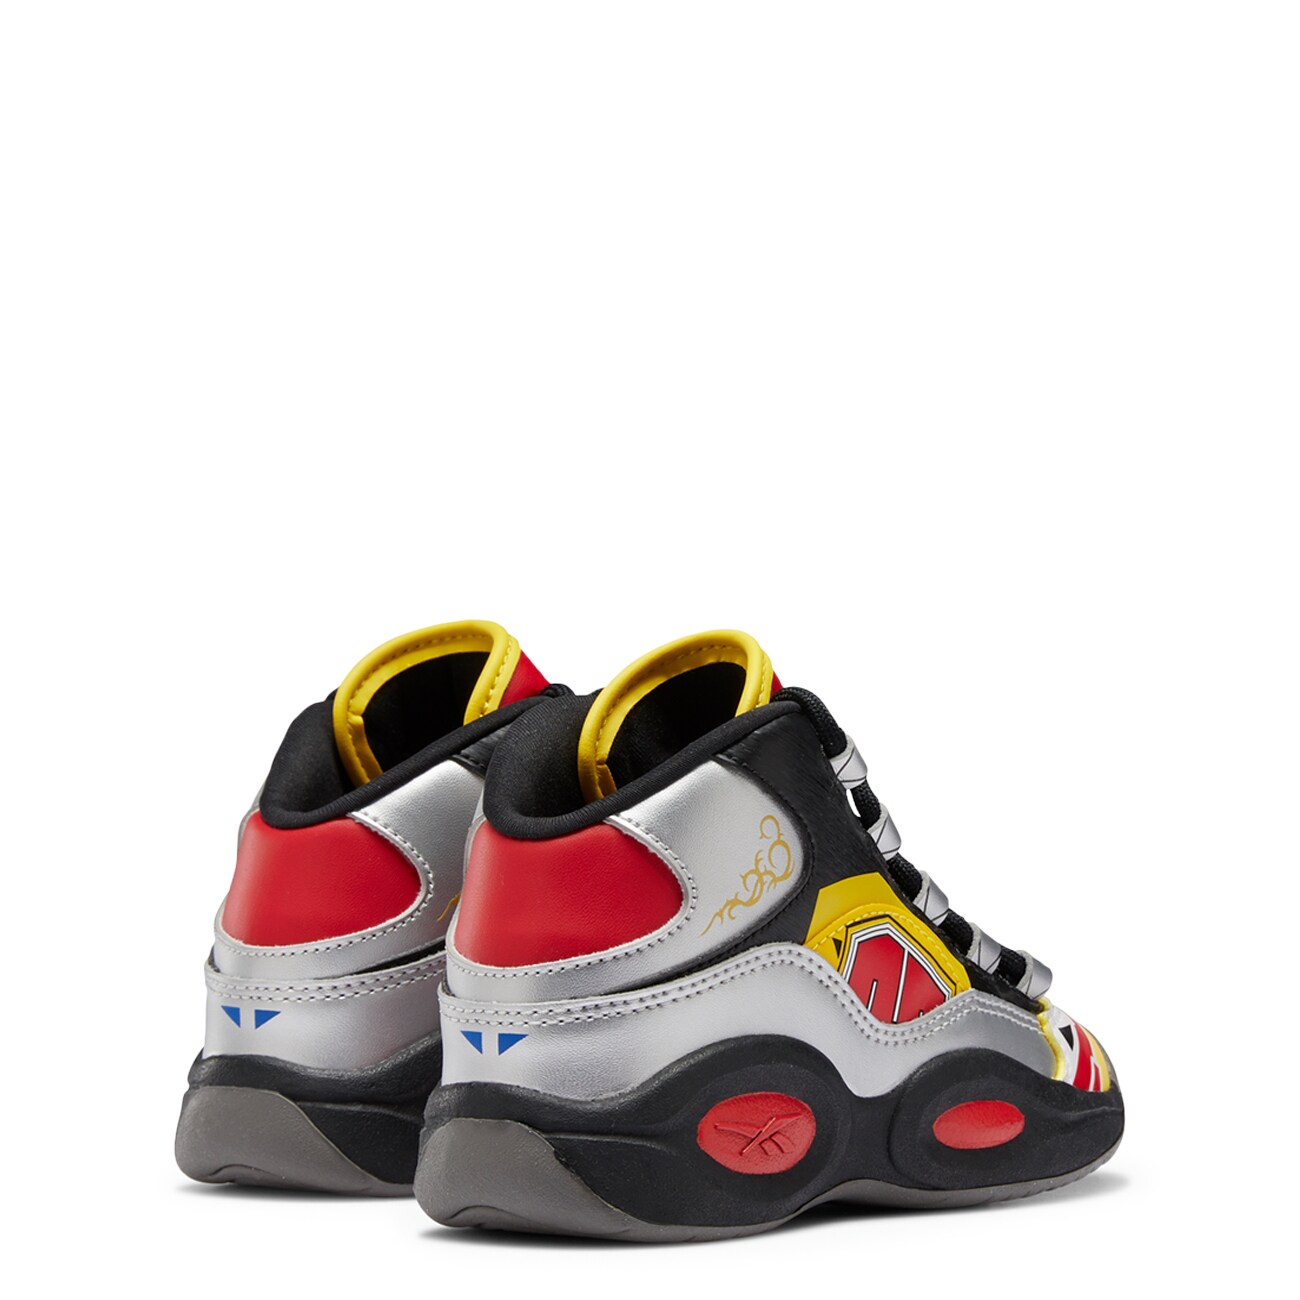 Youth Boys' Question Mid Basketball Shoe